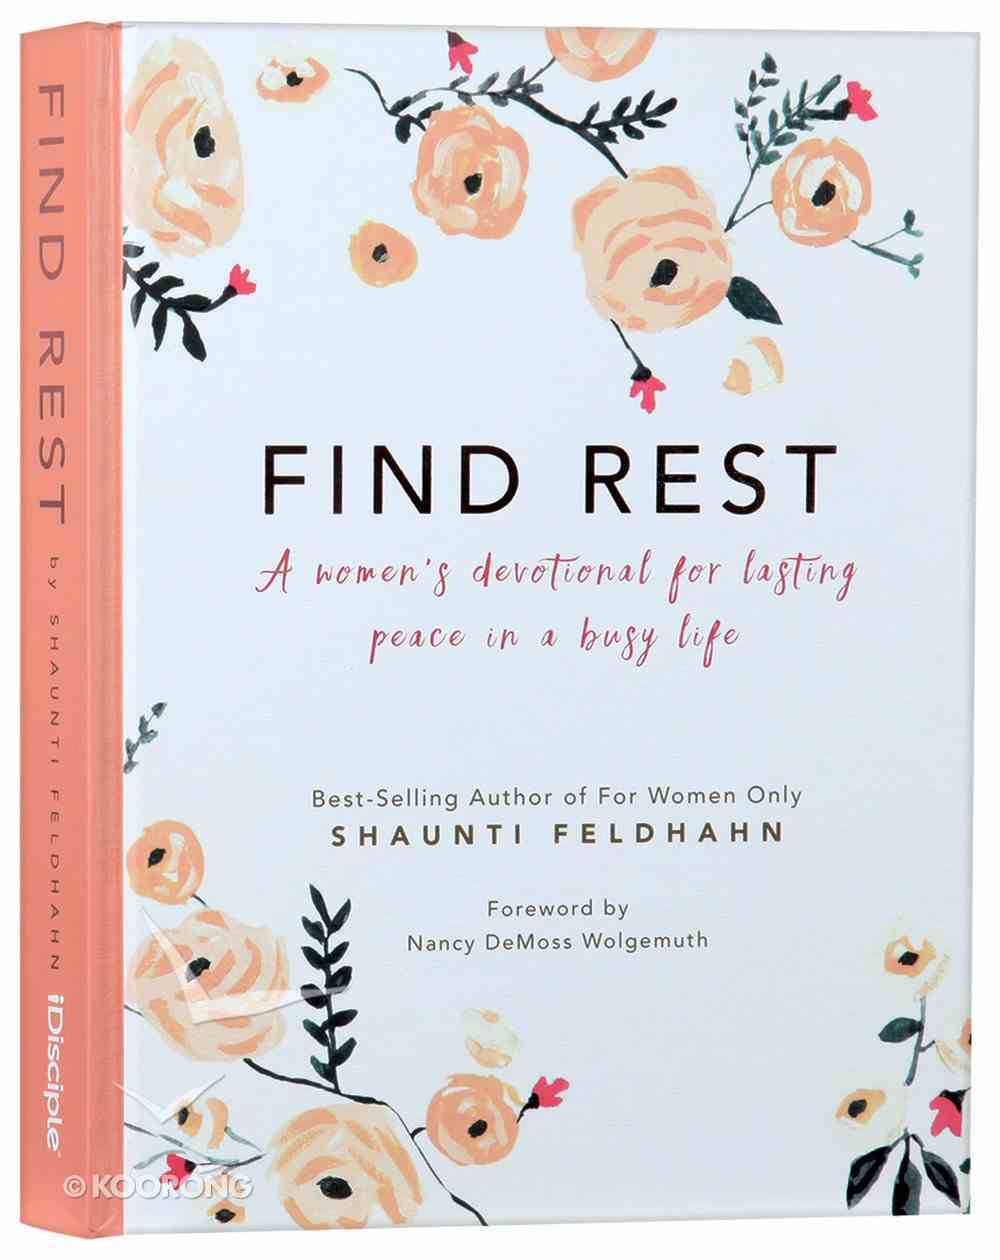 Find Rest: A Women's Devotional For Lasting Peace in a Busy Life Hardback